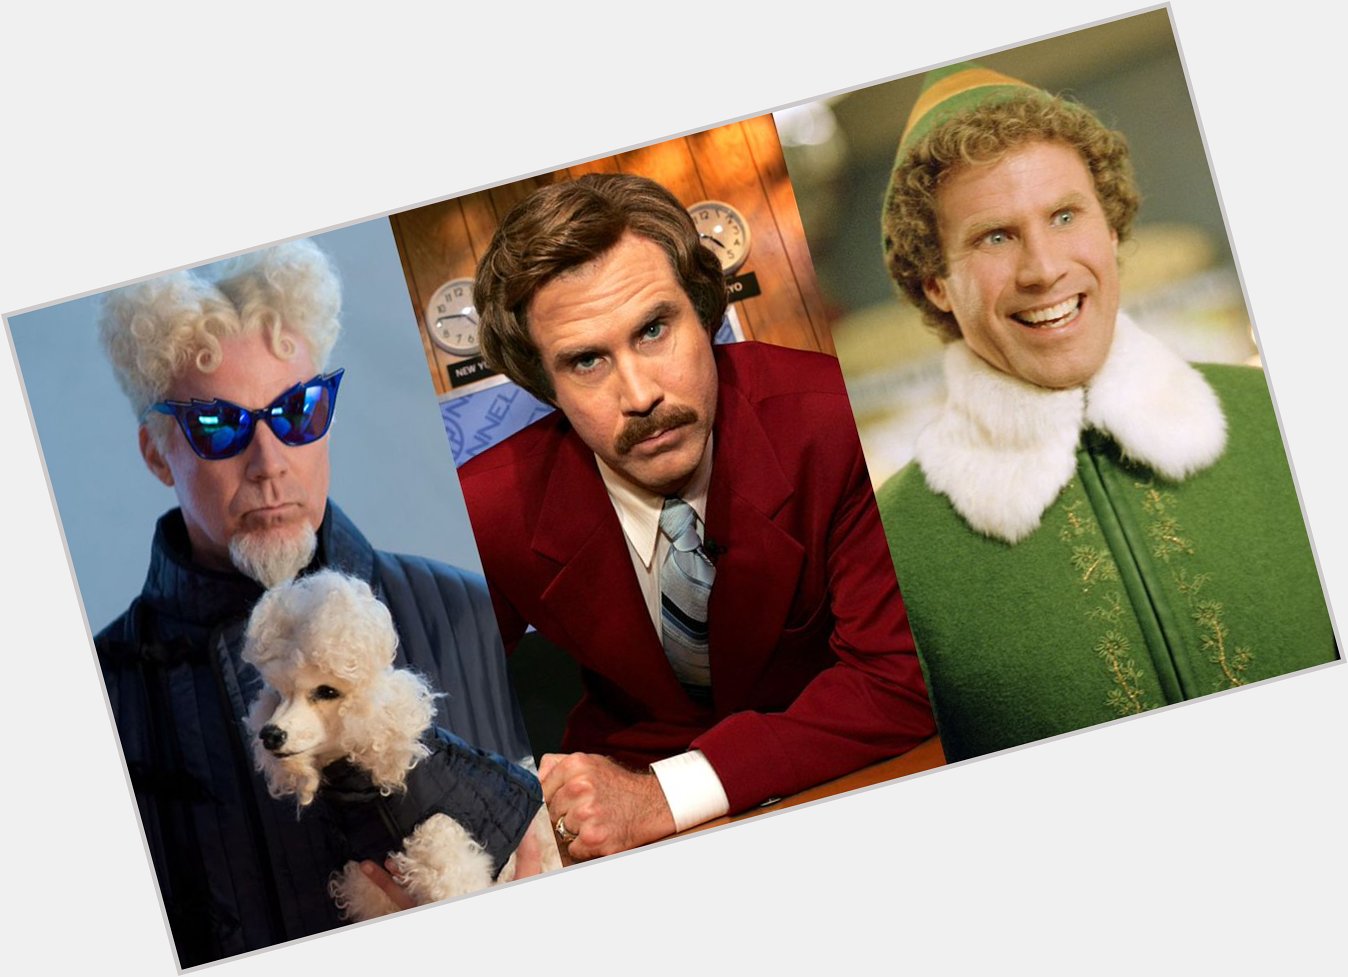 Happy 53rd birthday to Will Ferrell today! 